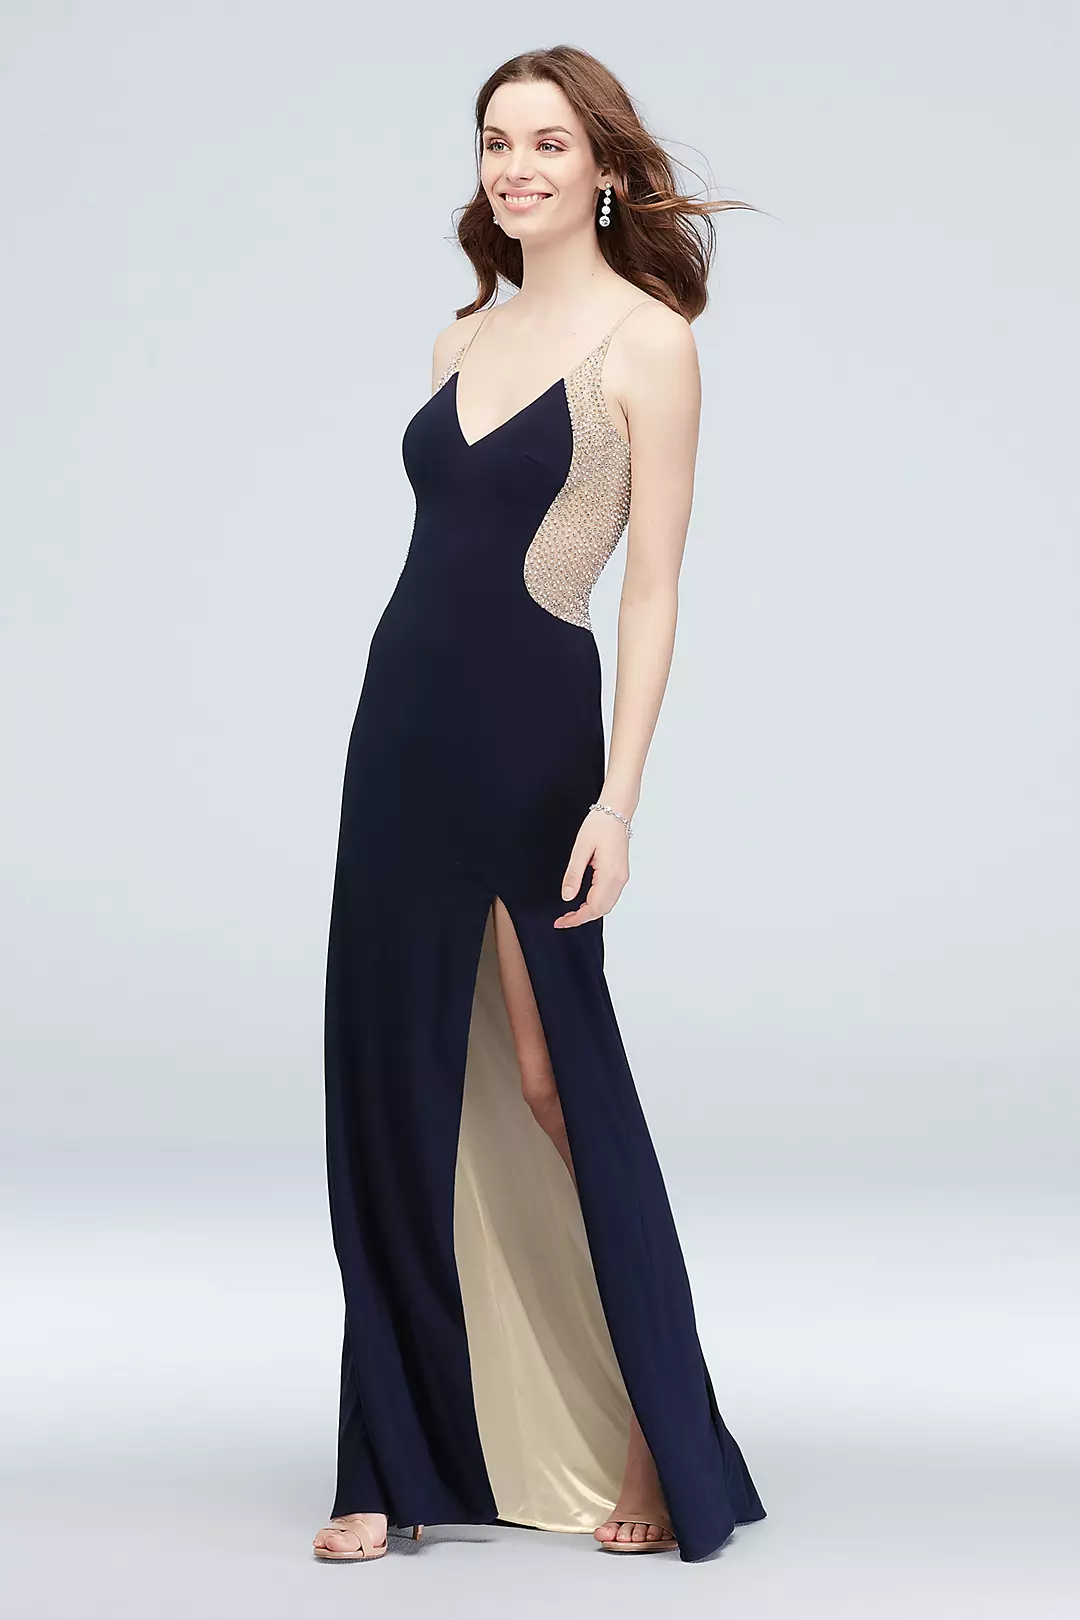 Deep-V Illusion Silhouette Crystal Gown with Slit Image